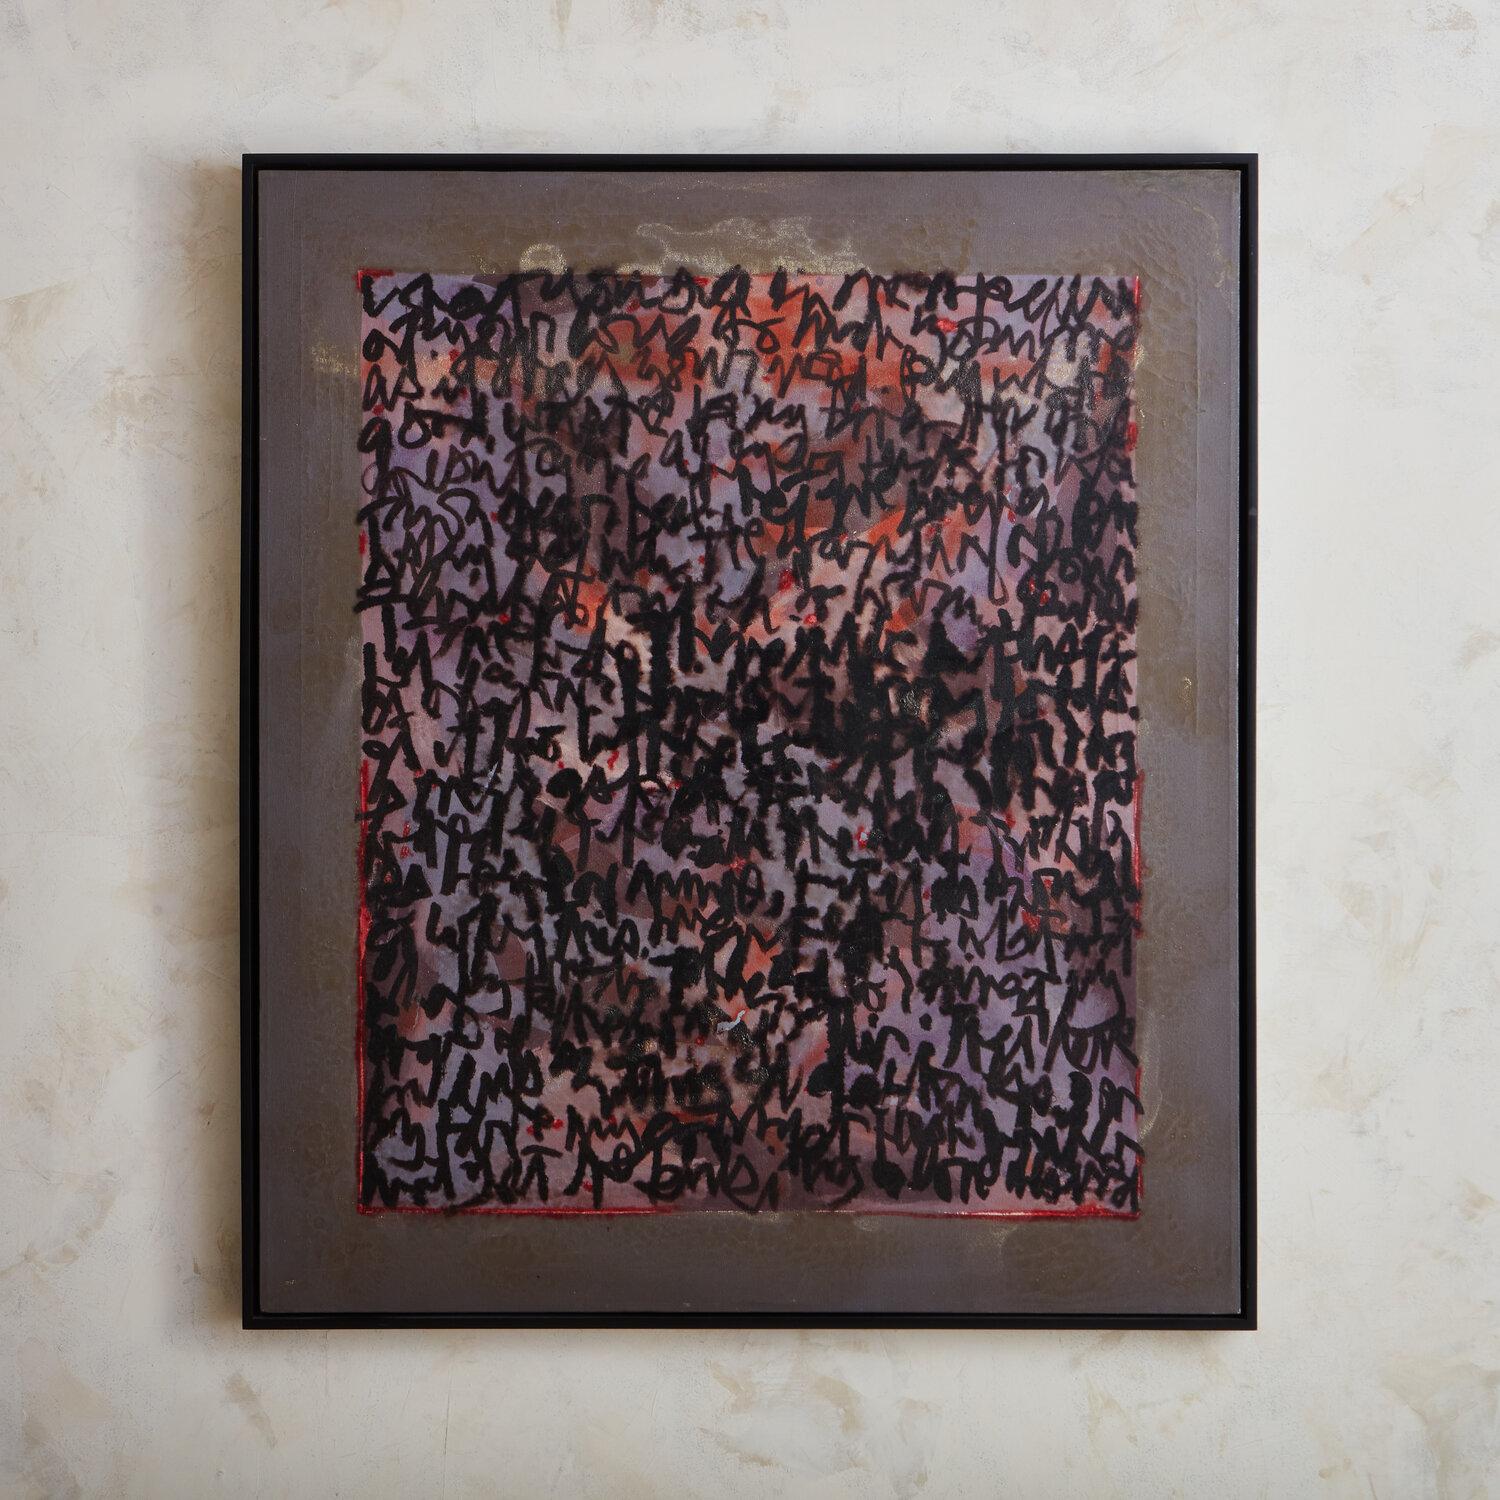 An oil on canvas painting by American artist, Harry Bouras (1931- 1990). Signed en verso and dated September 1974 and titled “Prologmena-I.” Presented in an original black gallery frame. 

Harry Bouras was an internationally known artist, critic,